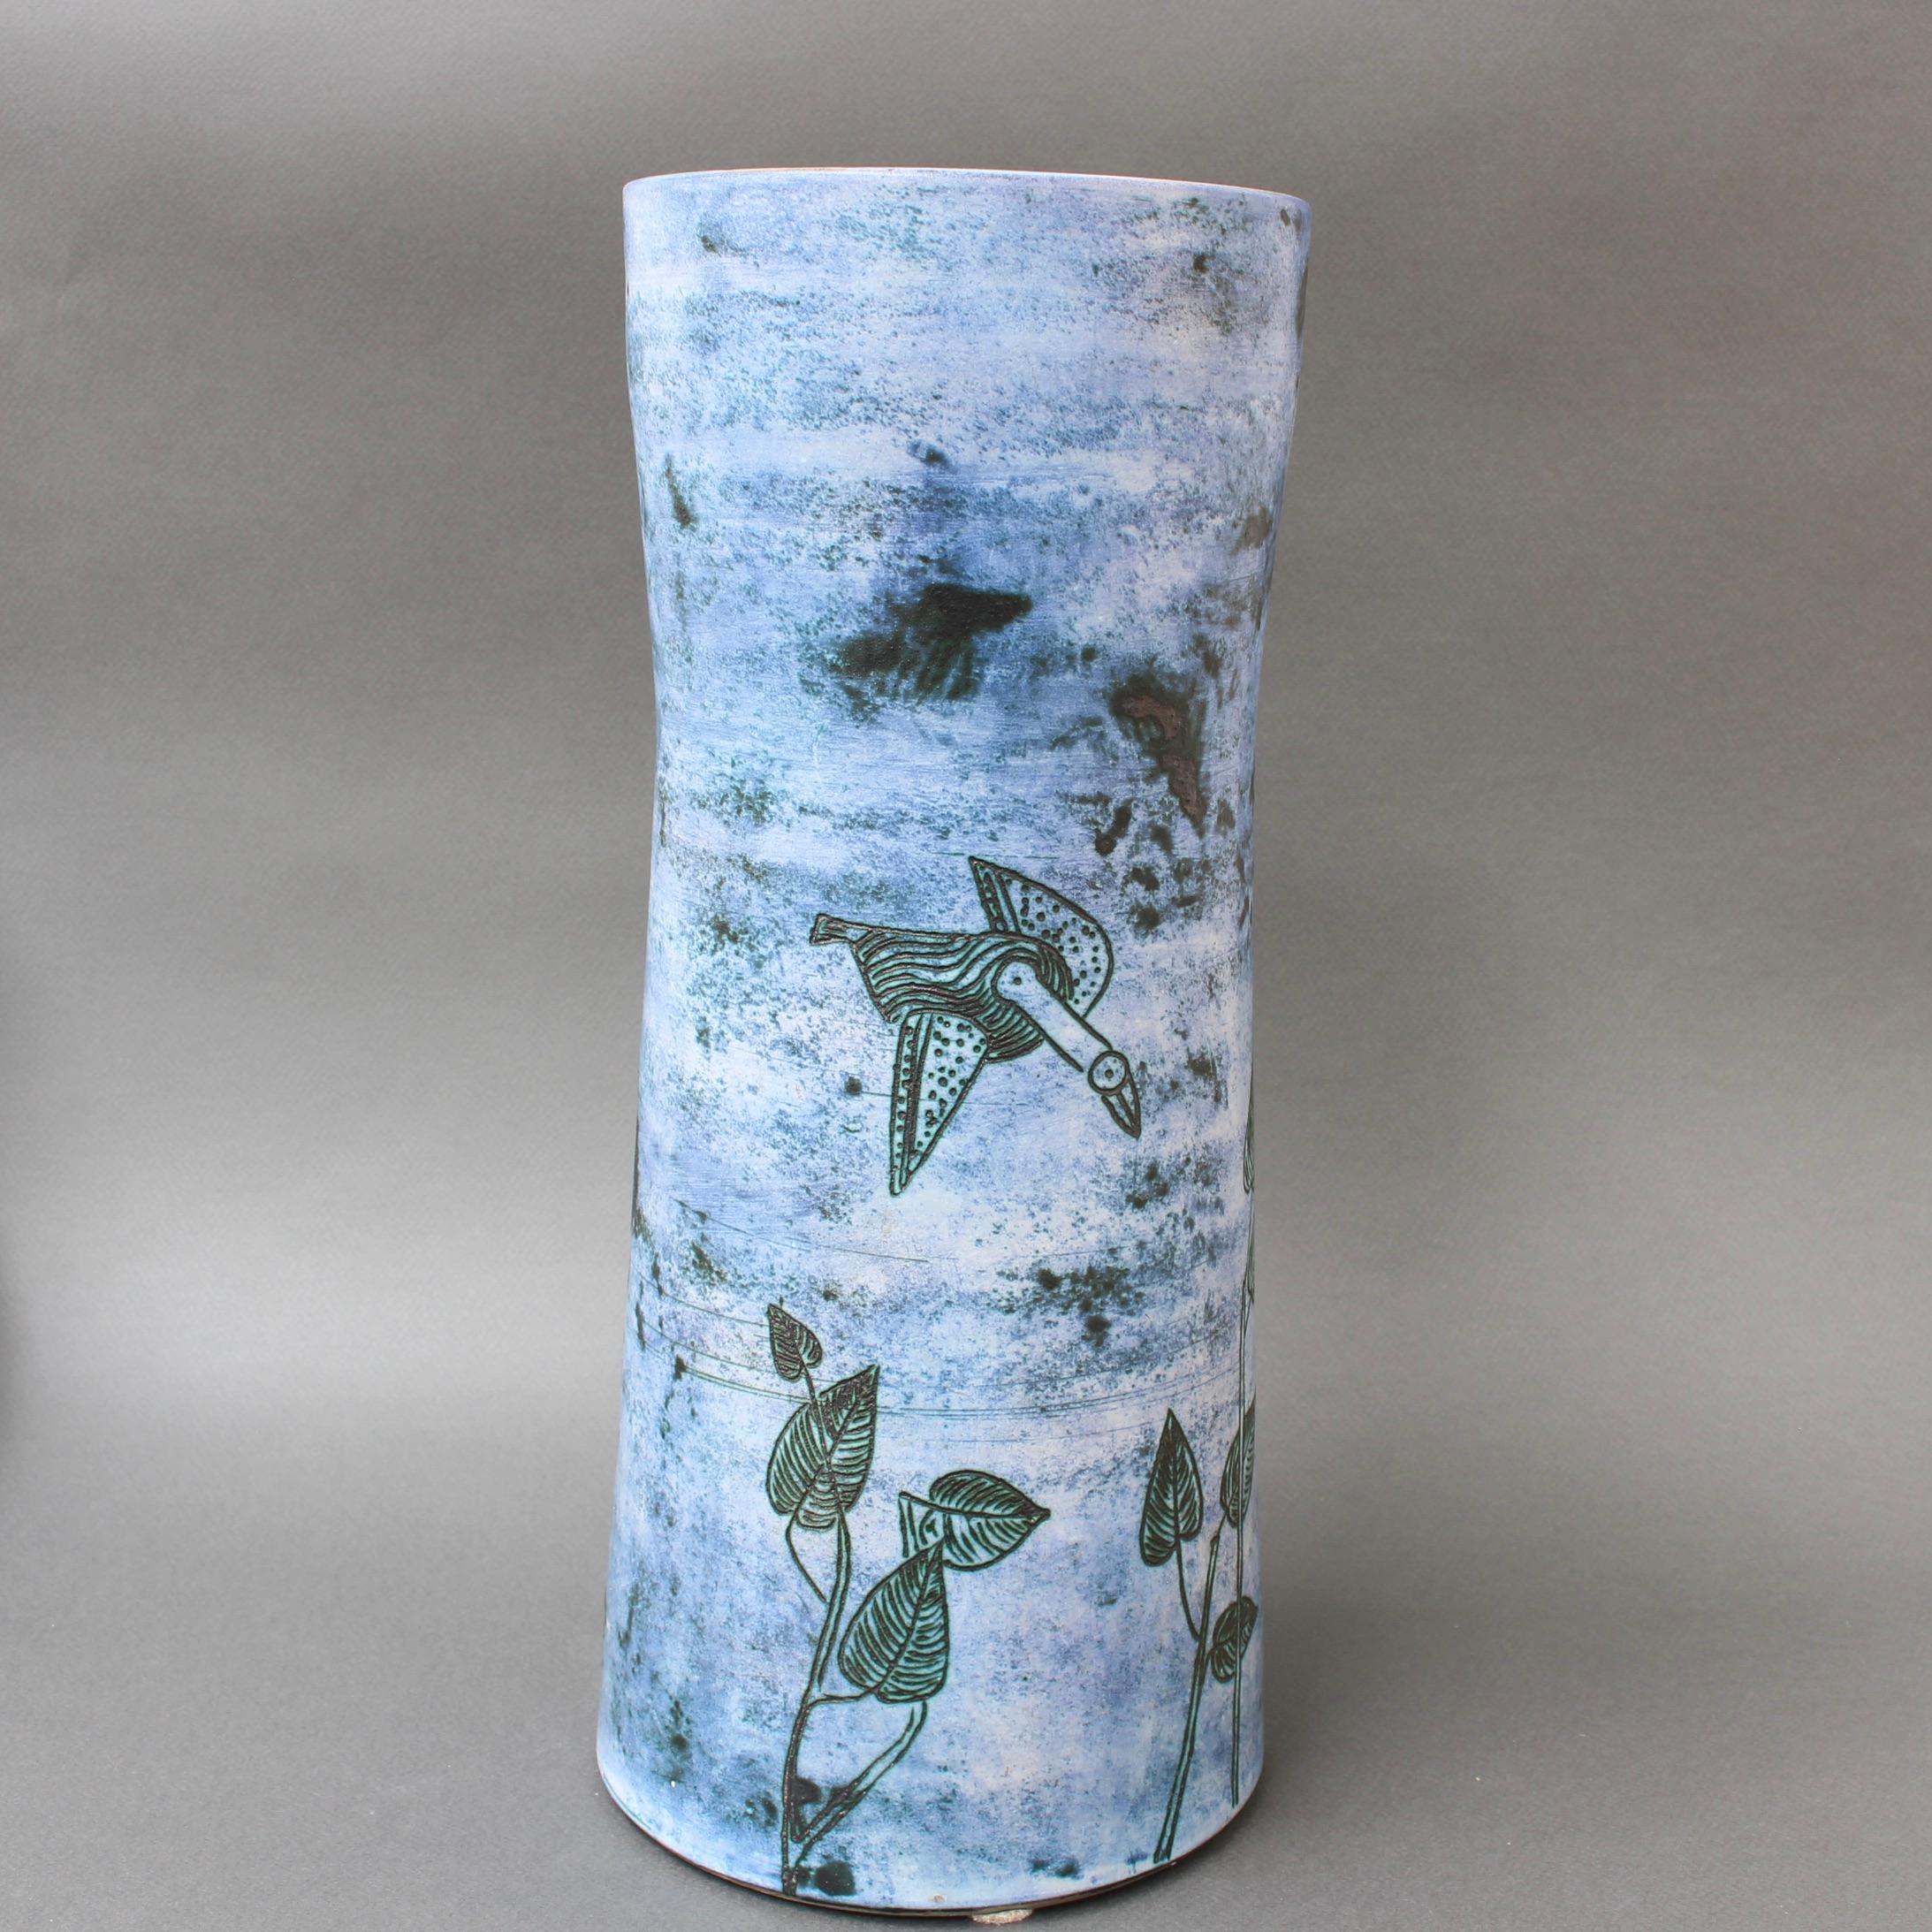 Large midcentury ceramic vase by Jacques Blin (circa 1950s). A delightful piece displaying Blin's trademark misty glaze with subtle blue hue on the exterior and green-oatmeal glaze on the inner lip and interior. Stylised birds flying over leafy